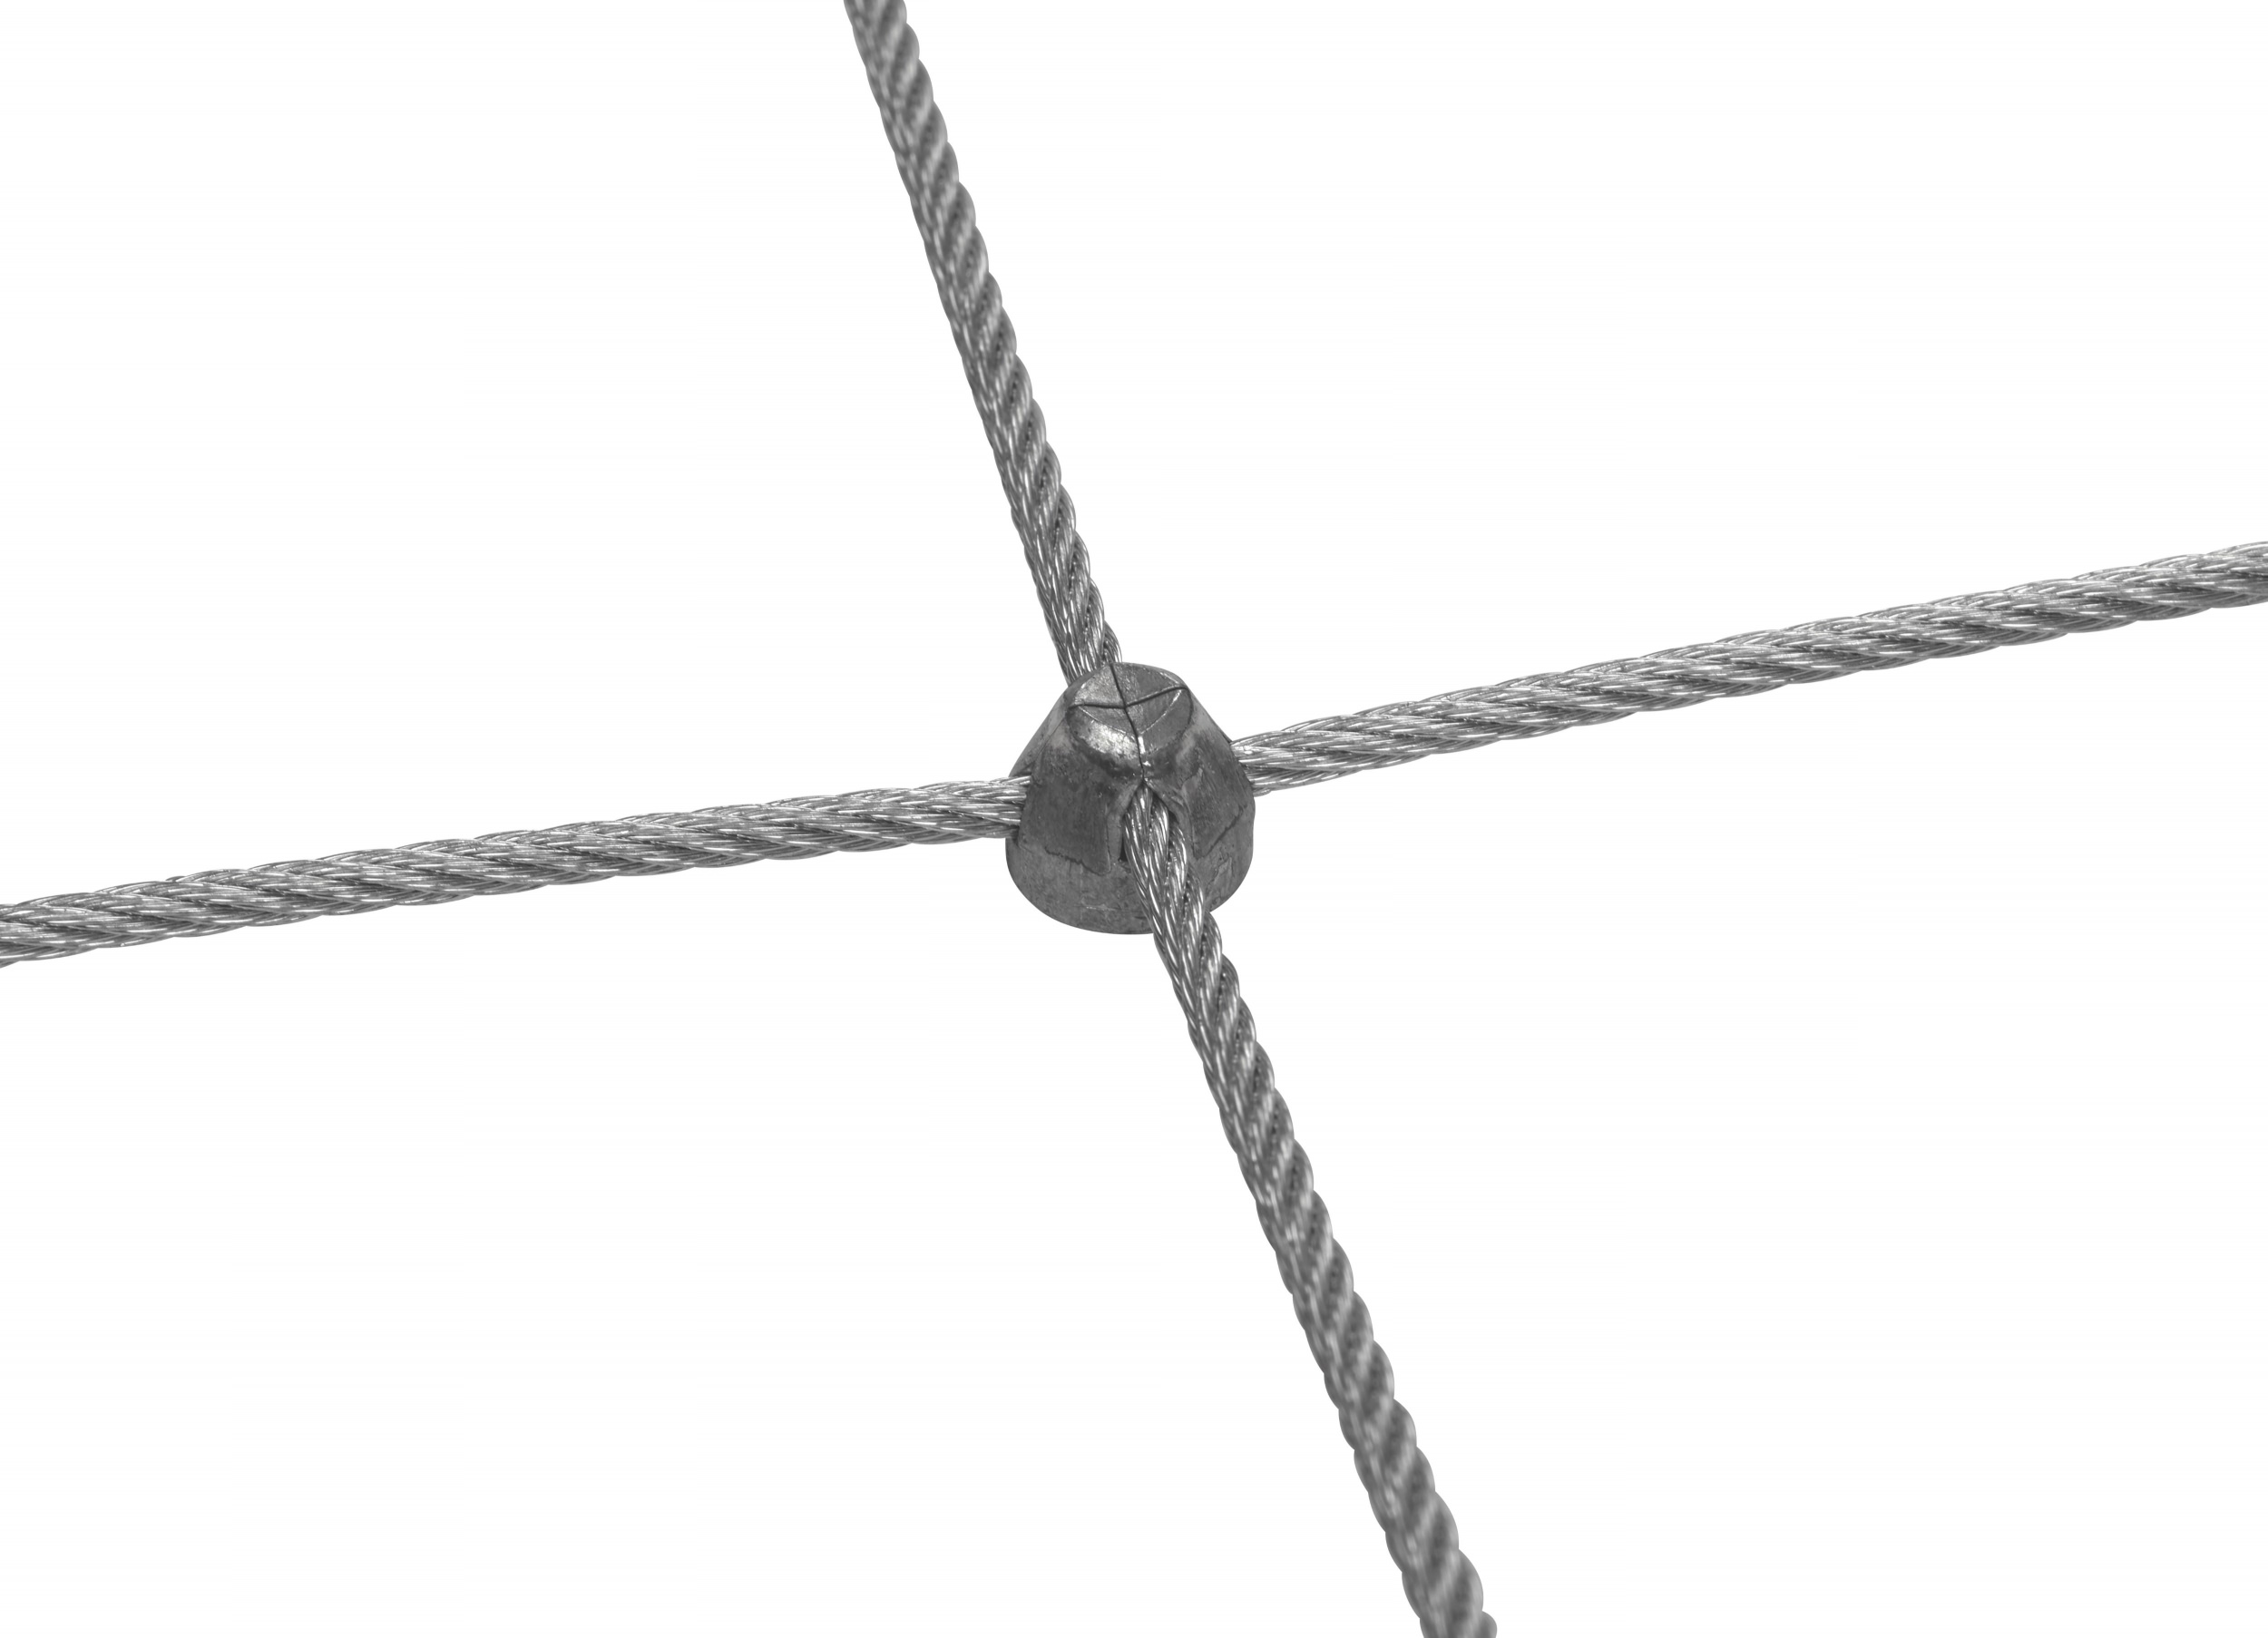 Tailor-made Stainless Steel Wire Rope Mesh with 3.0 mm Rope Diameter